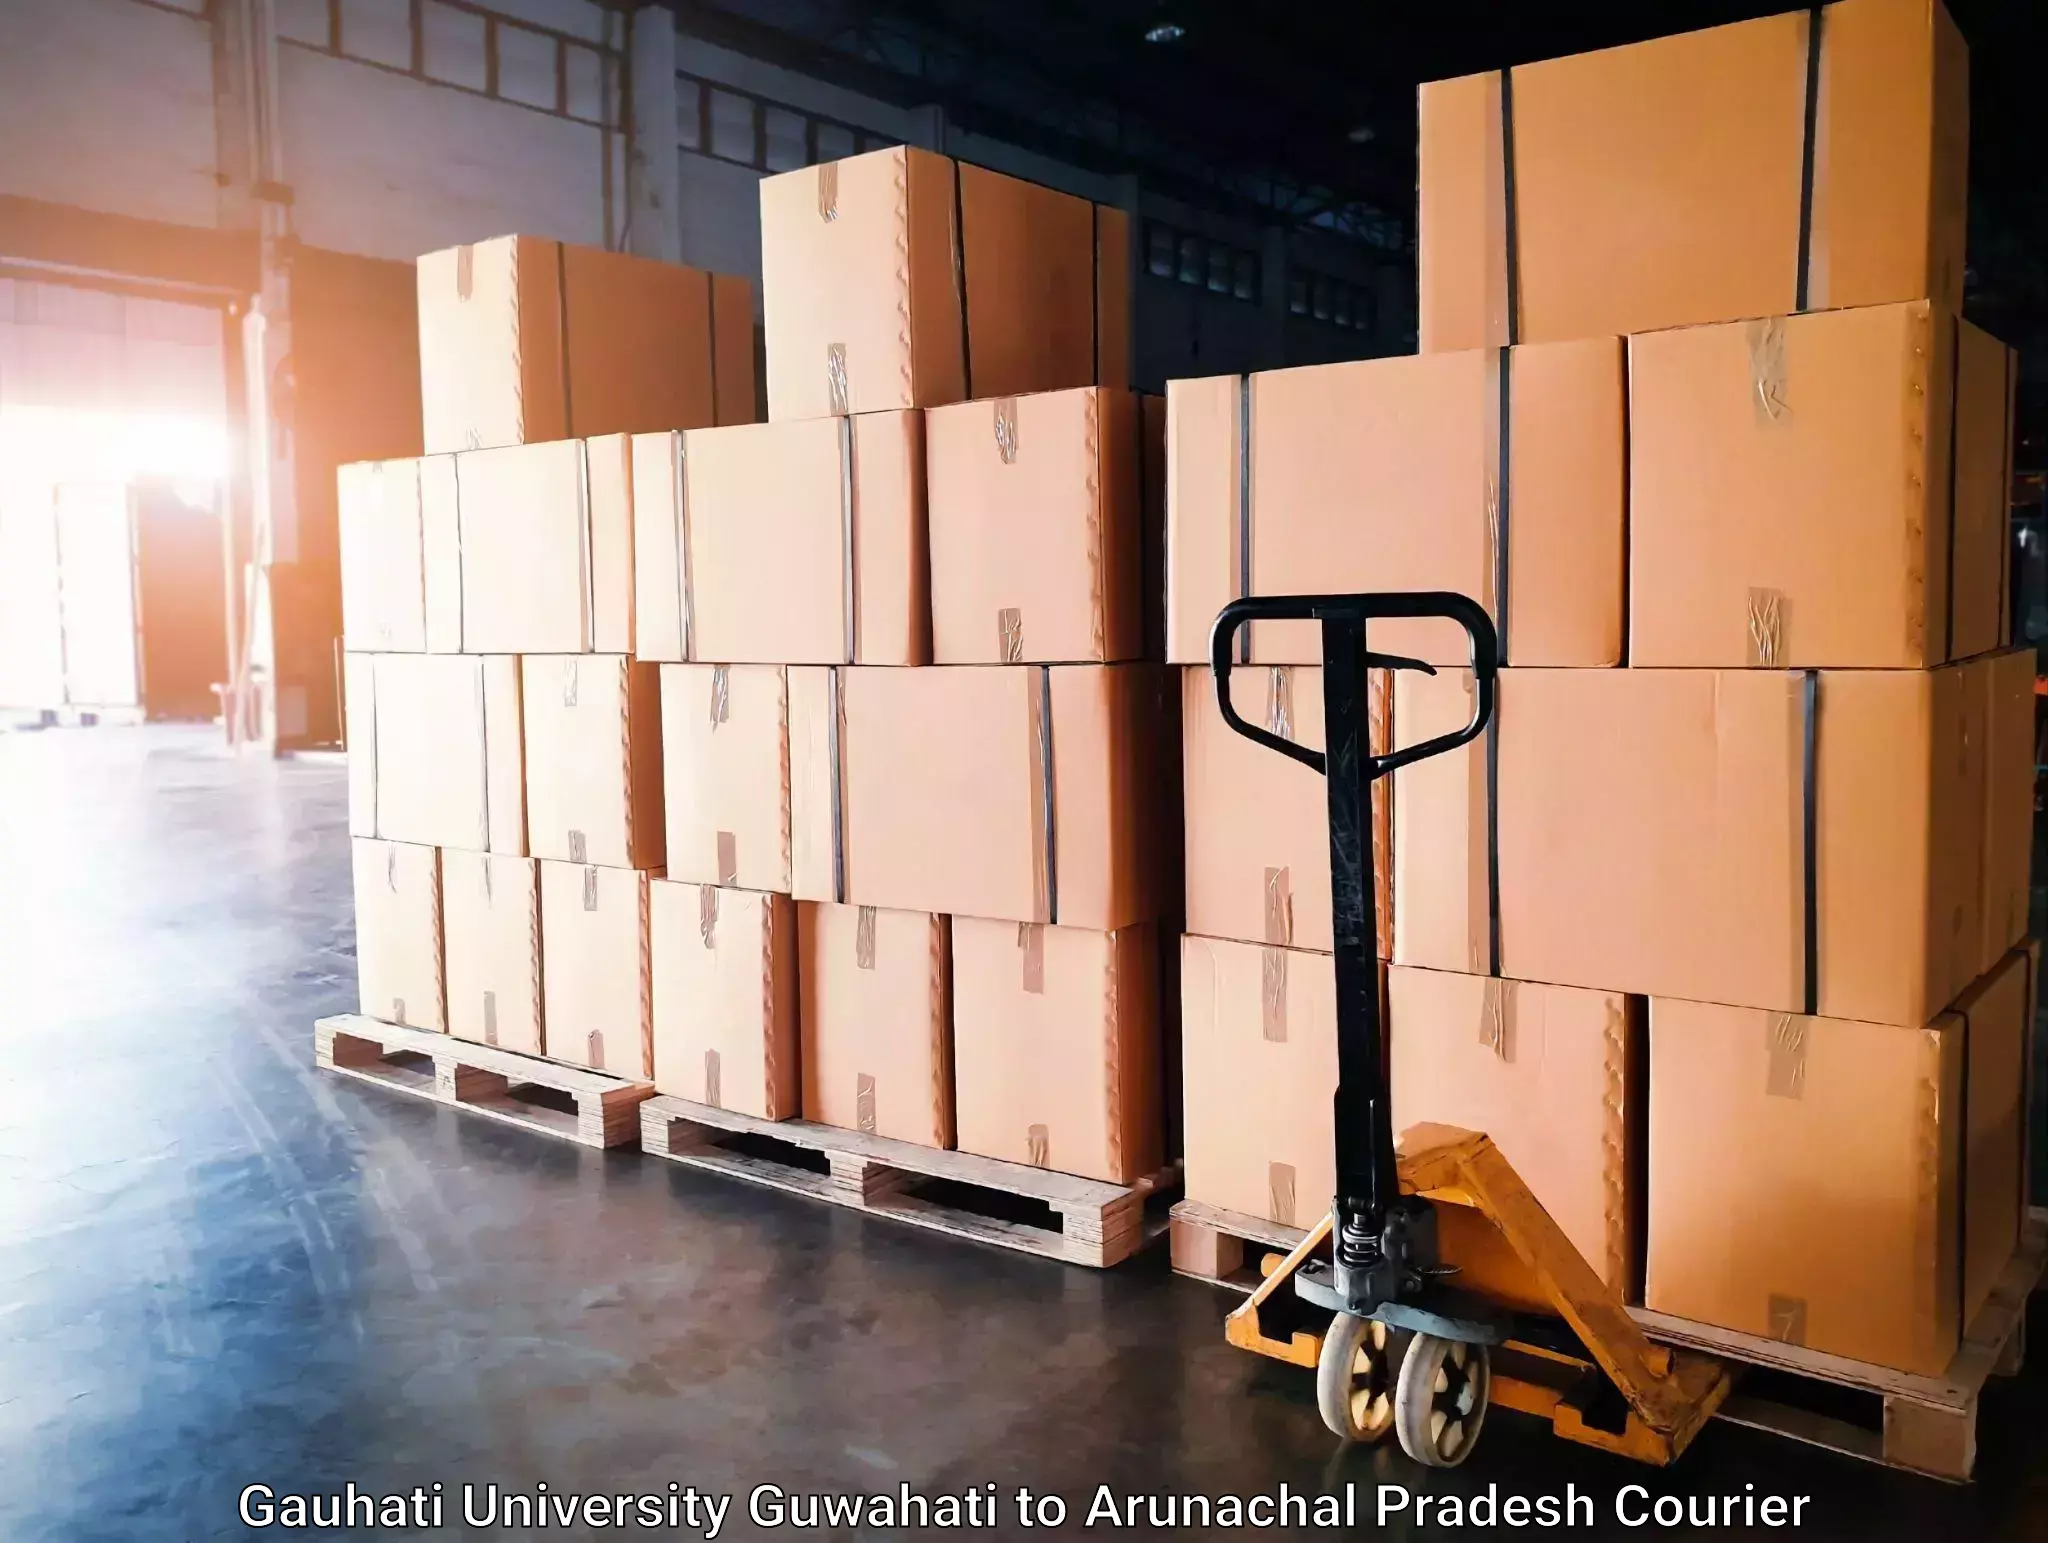 Secure freight services in Gauhati University Guwahati to Lohit